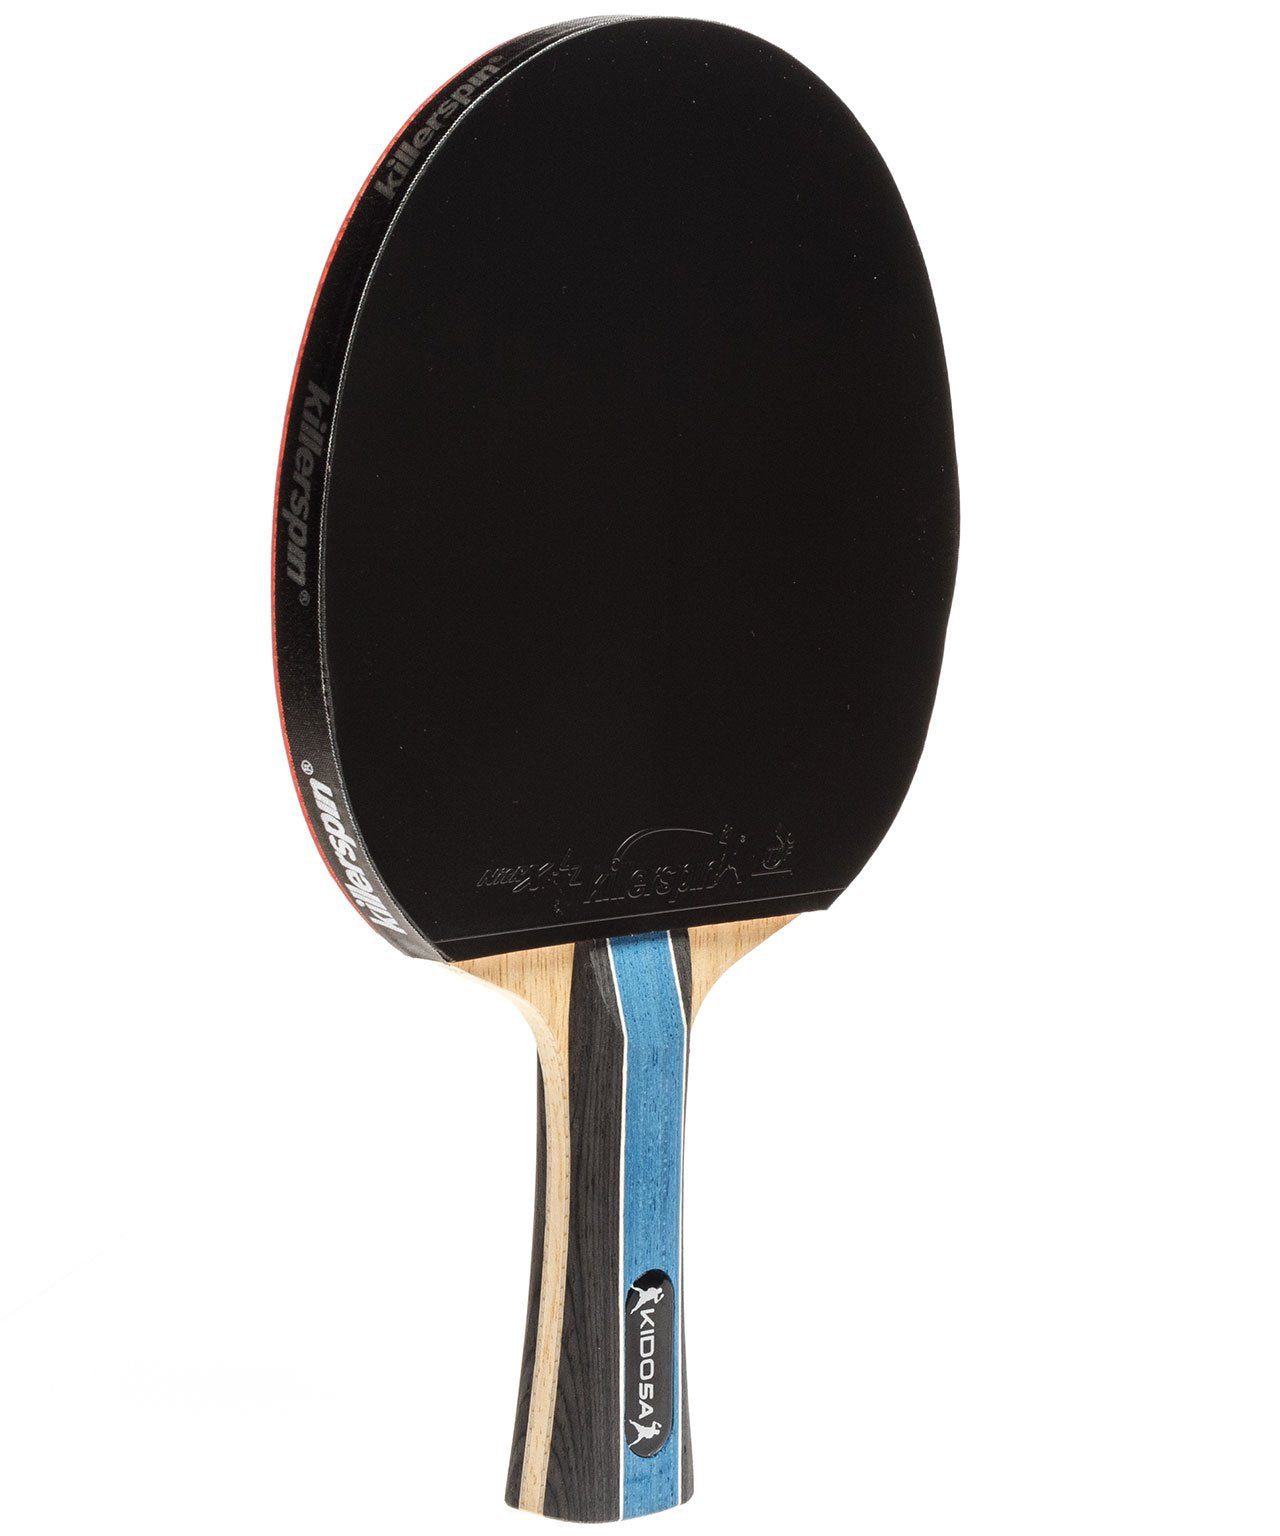 Killerspin Table Tennis Paddle Kido 5A RTG - Flared Black Rubber